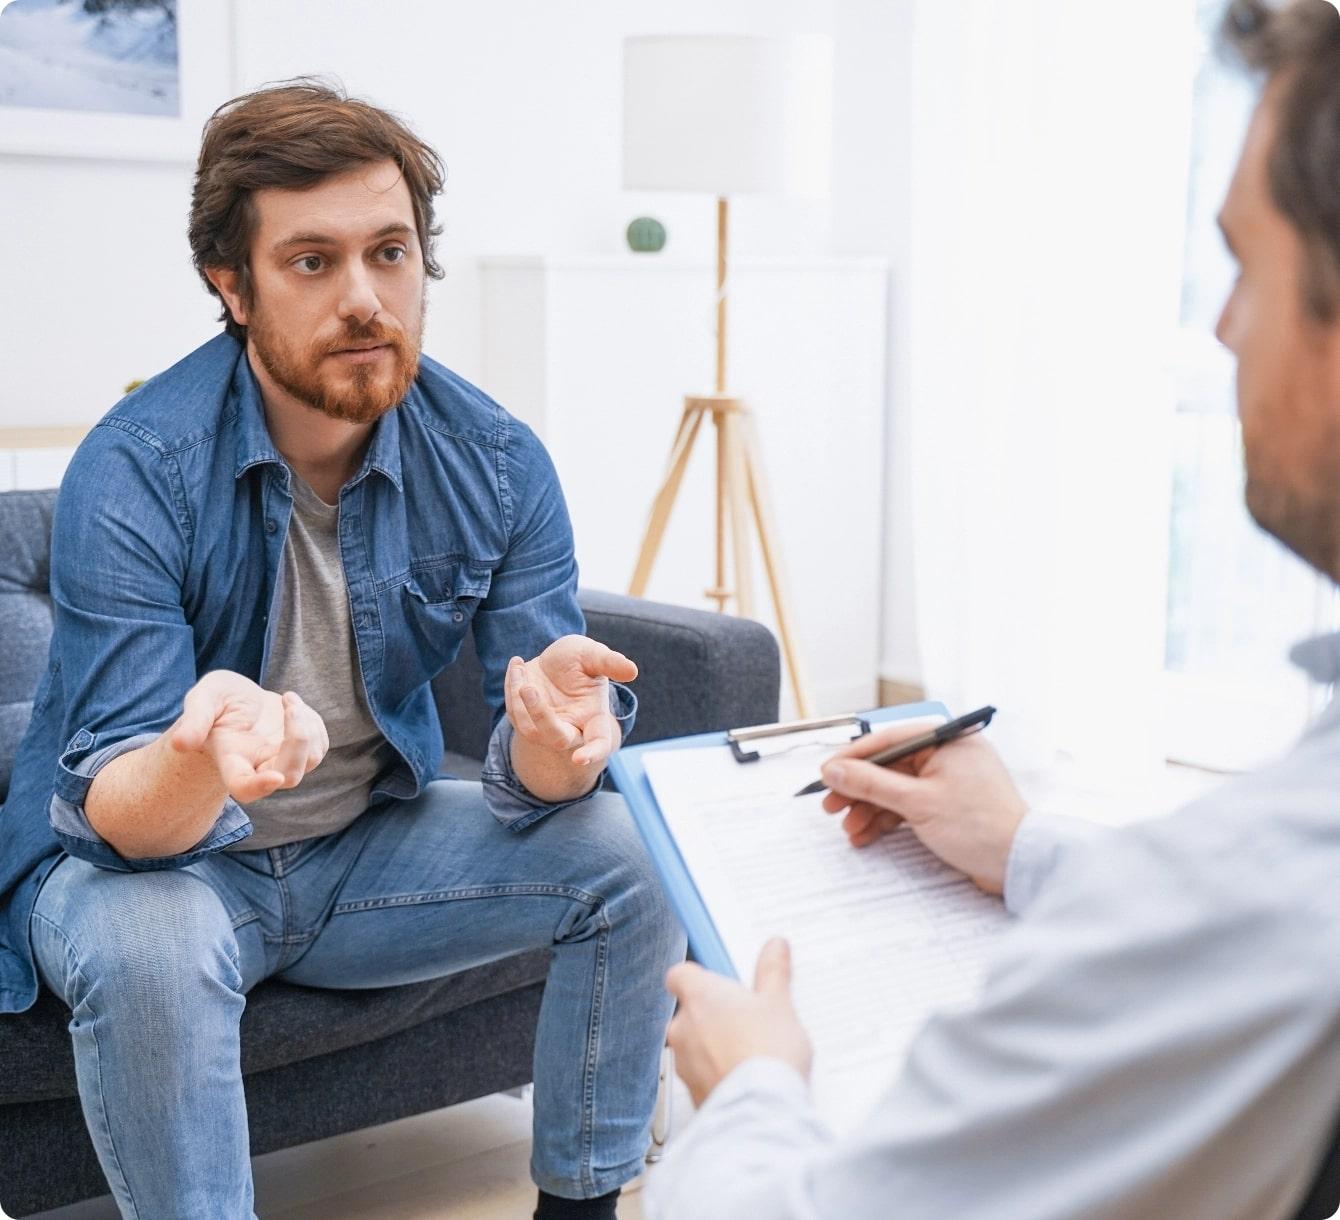 What to expect in therapy